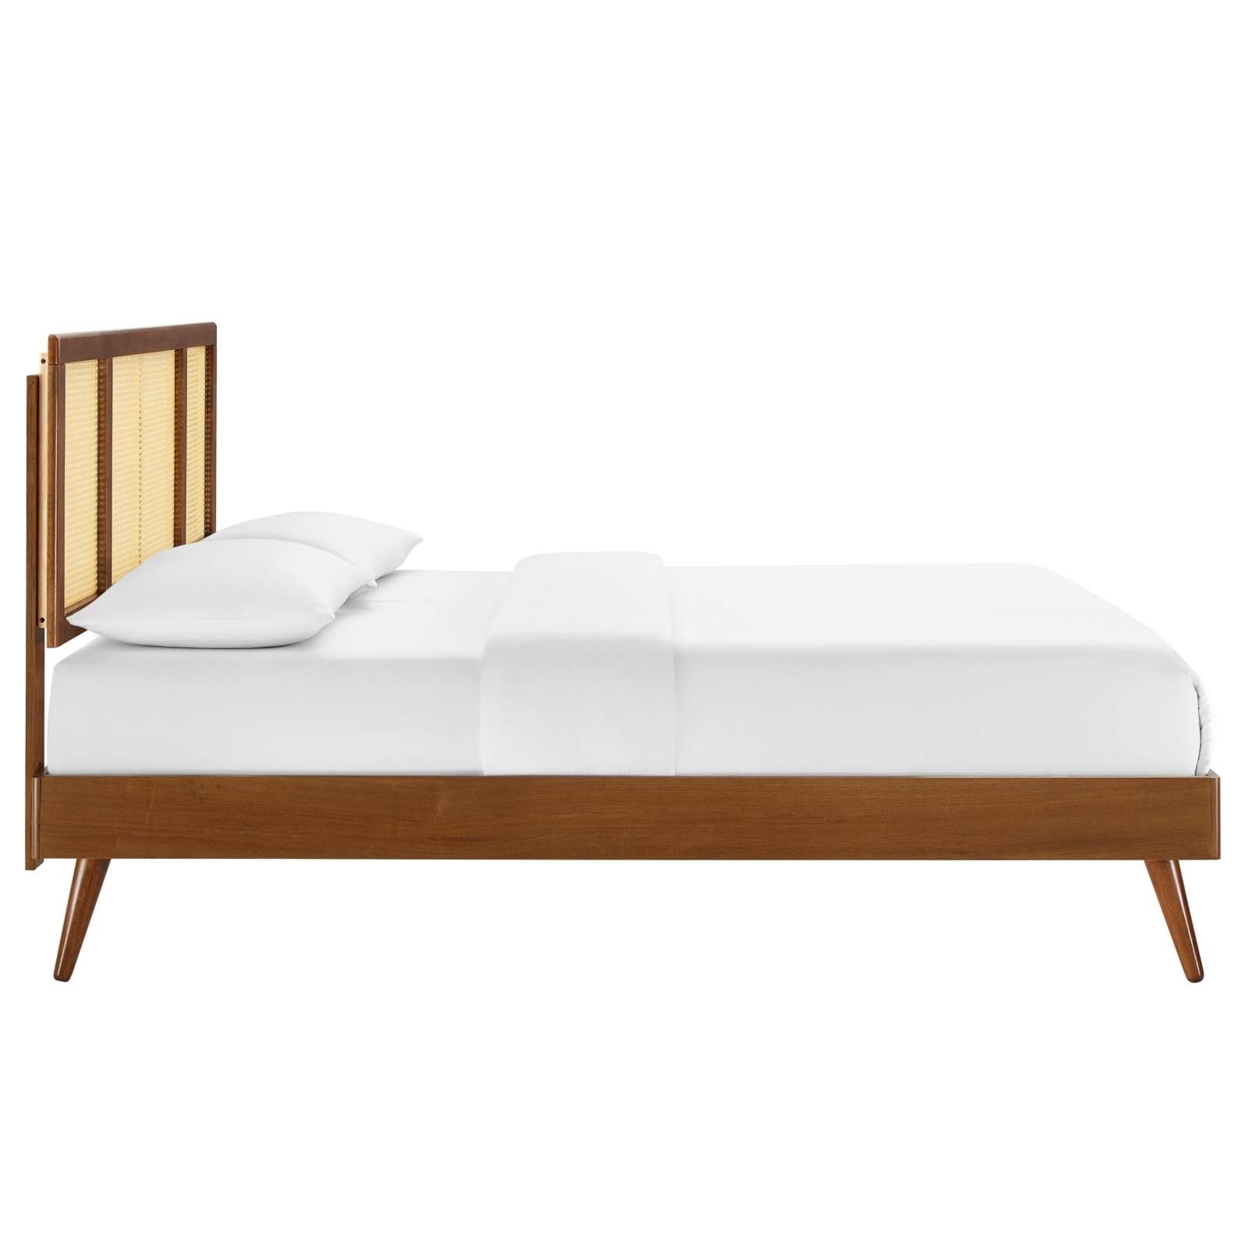 Kelsea Cane And Wood King Platform Bed With Splayed Legs, Walnut